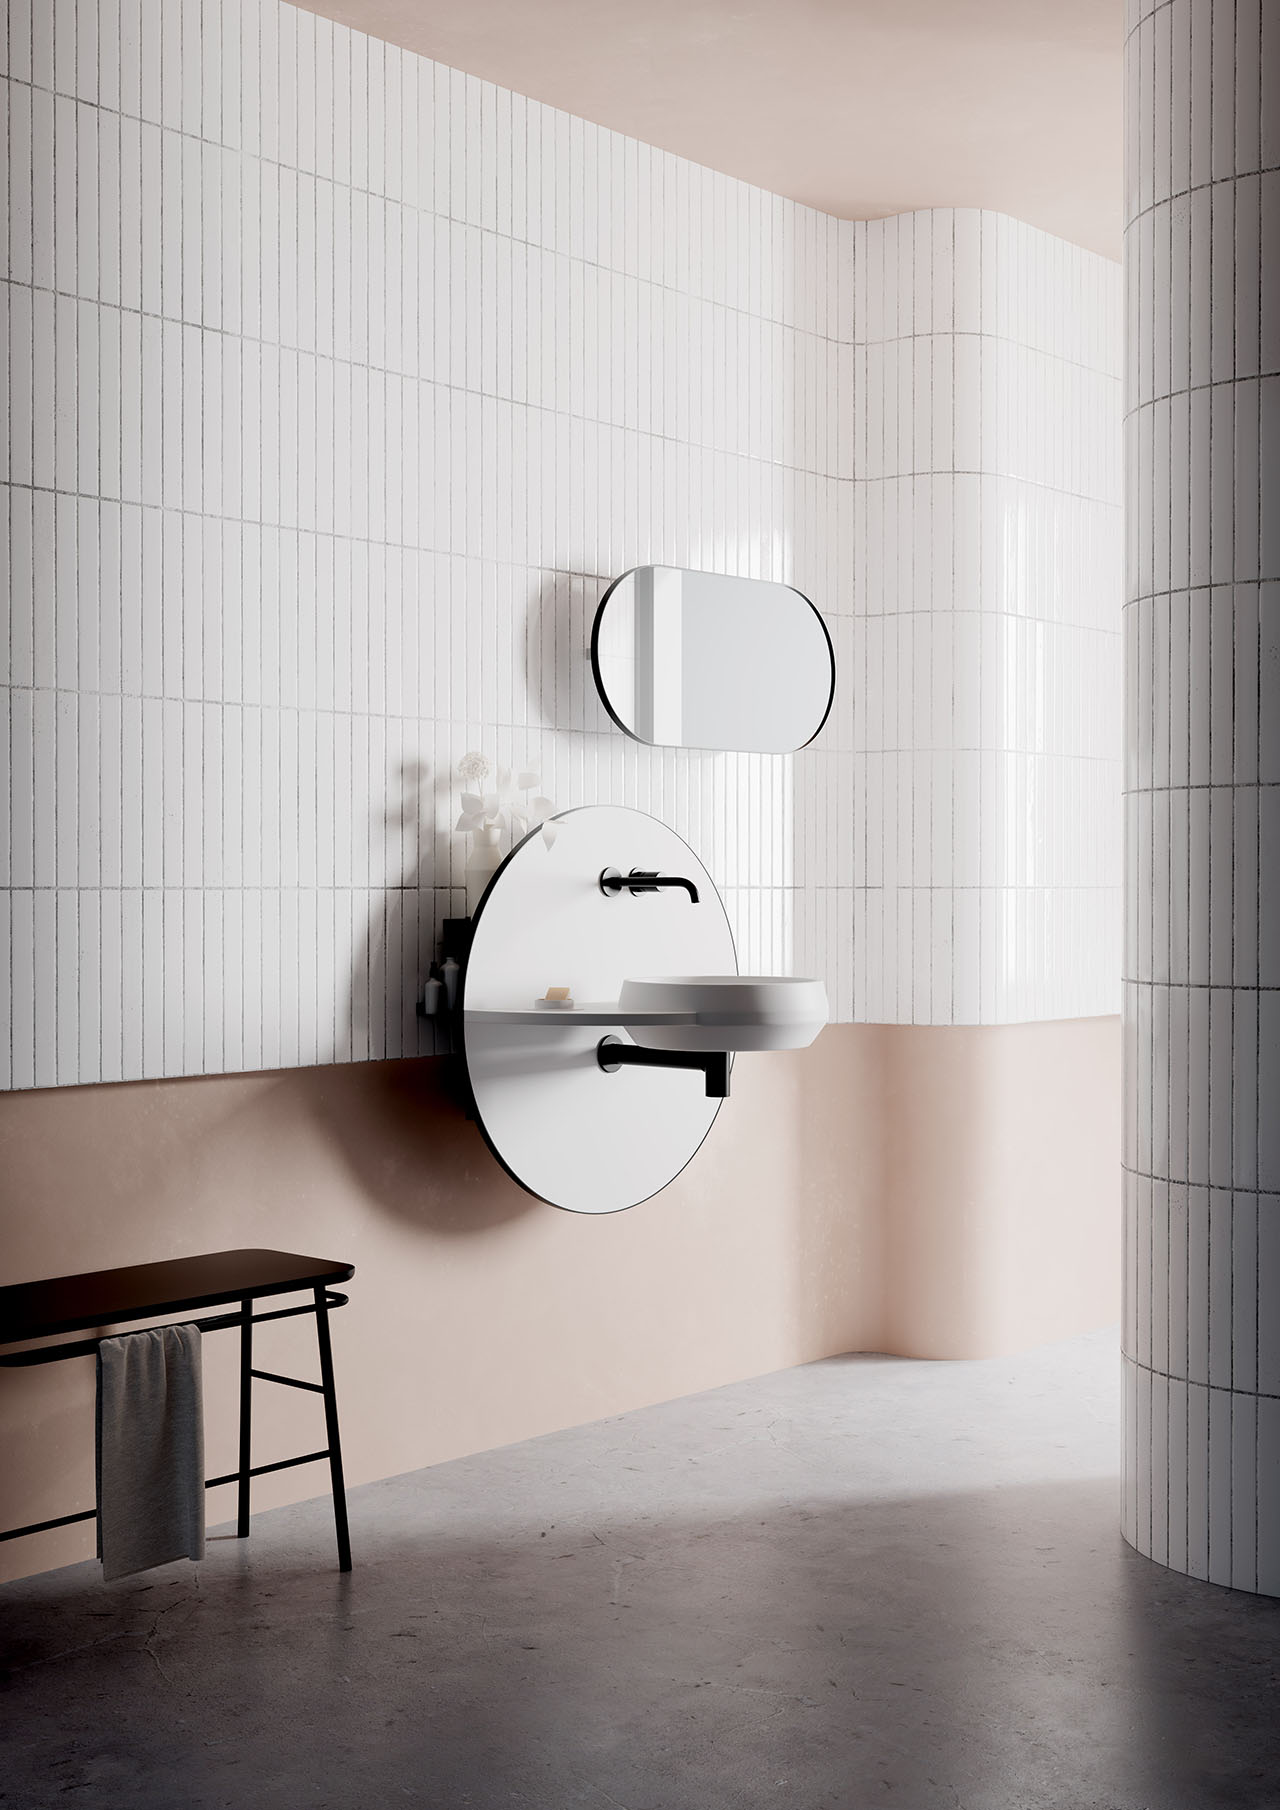 Arco multifunctional bathroom system by Spanish design studio Mut for Ex.t.